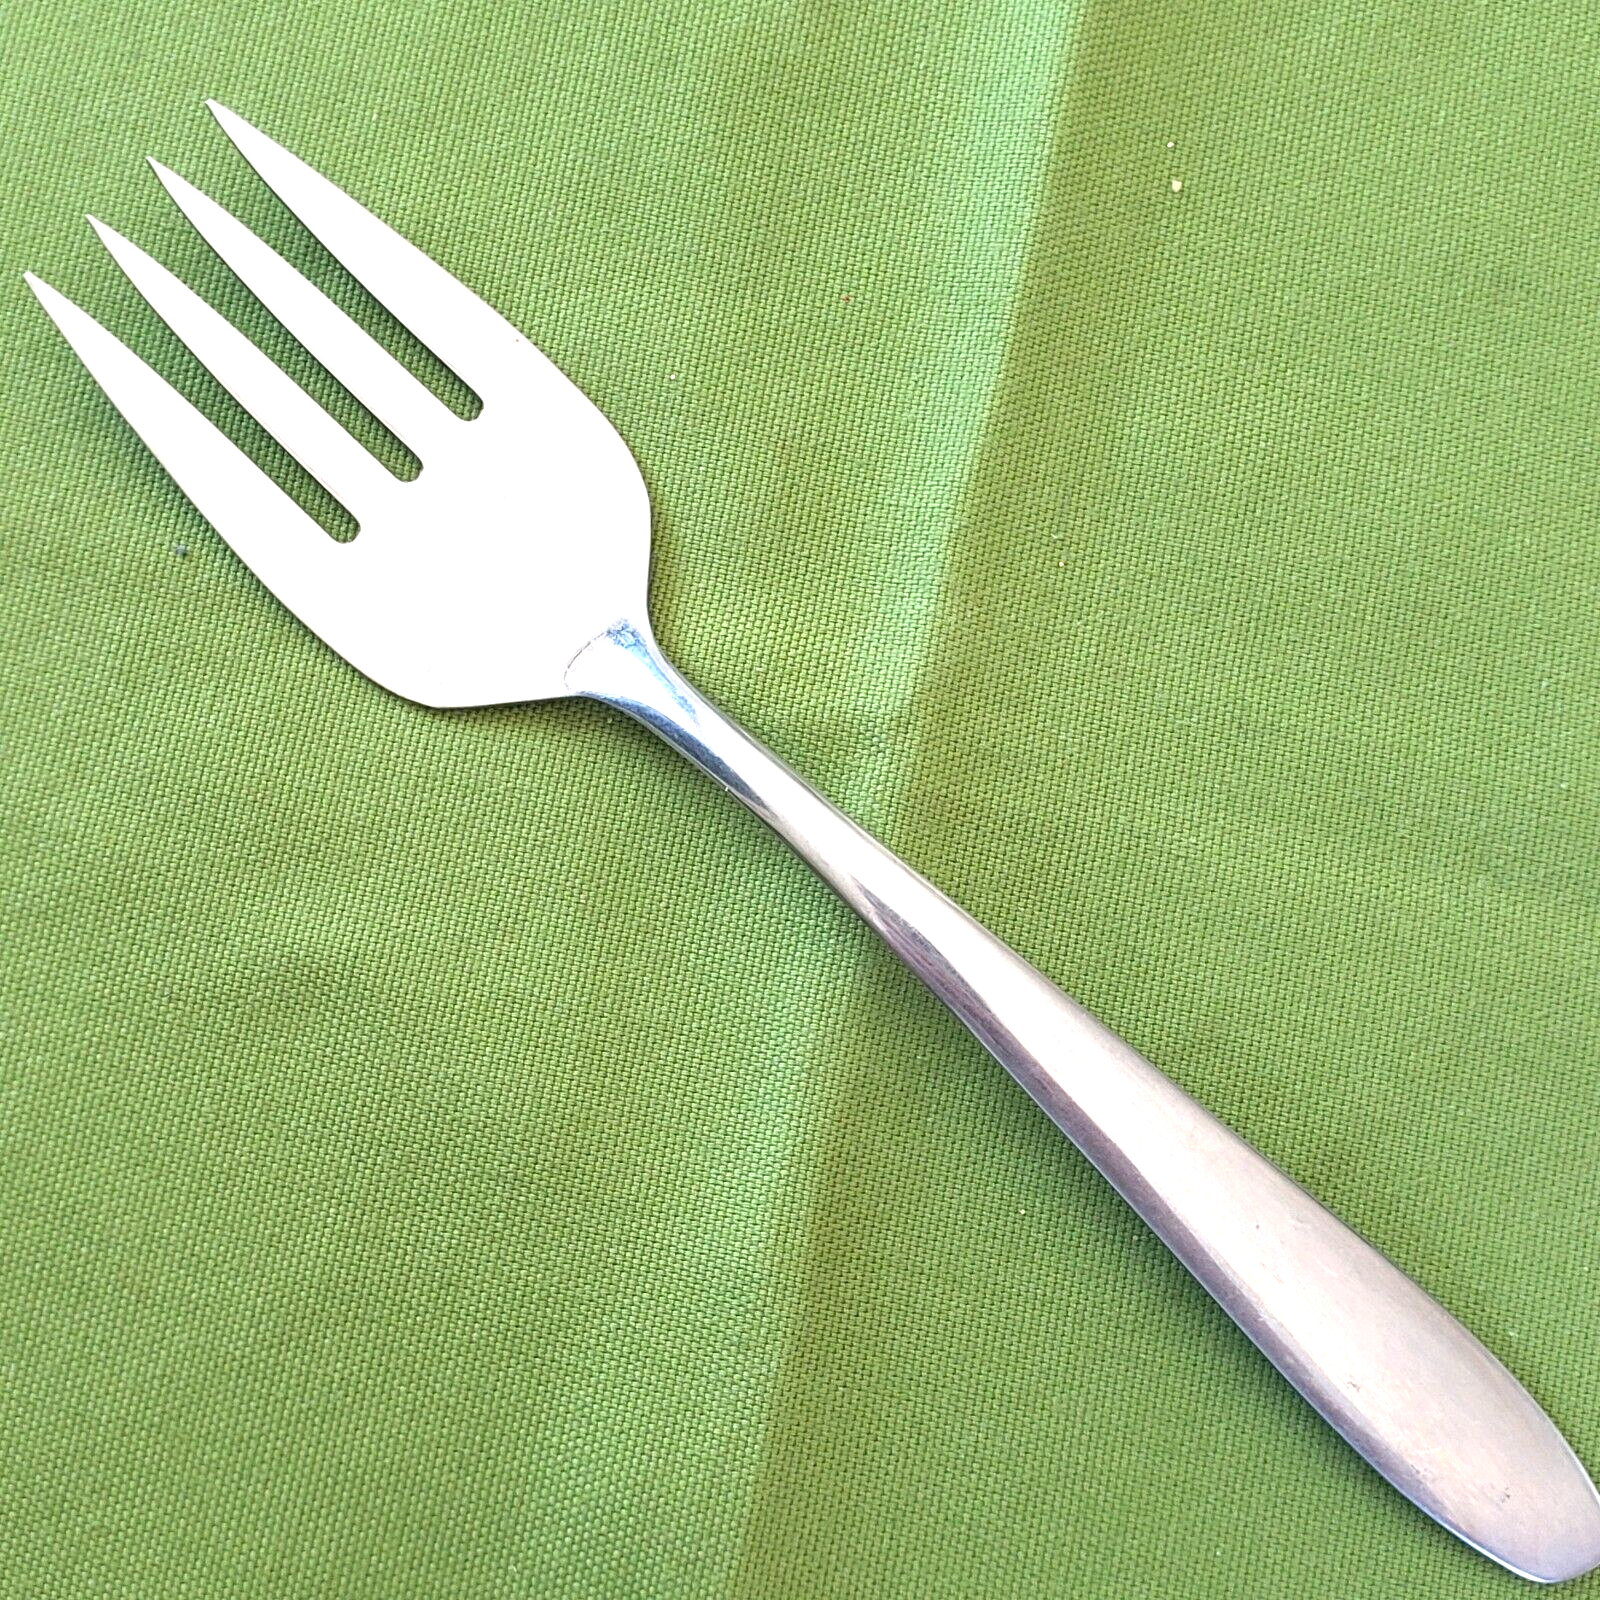 Imperial Stainless Medium Cold Meat Fork IMI39 Flatware USA 8 1/4" 41586 *^ - $5.93